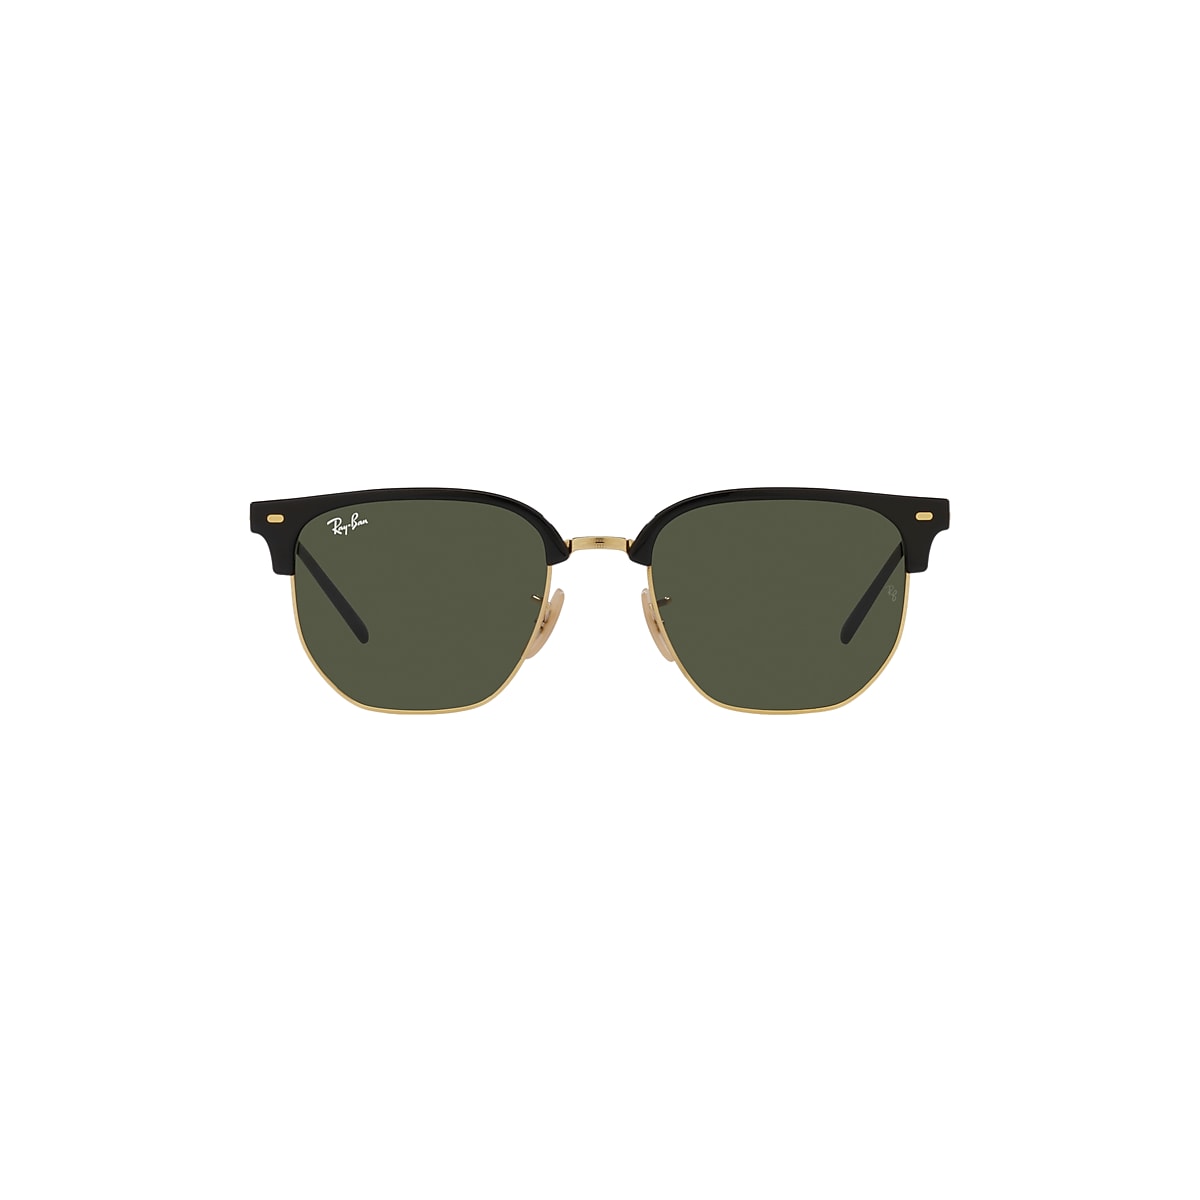 New Clubmaster Sunglasses in Black On Gold and Green Ray-Ban®